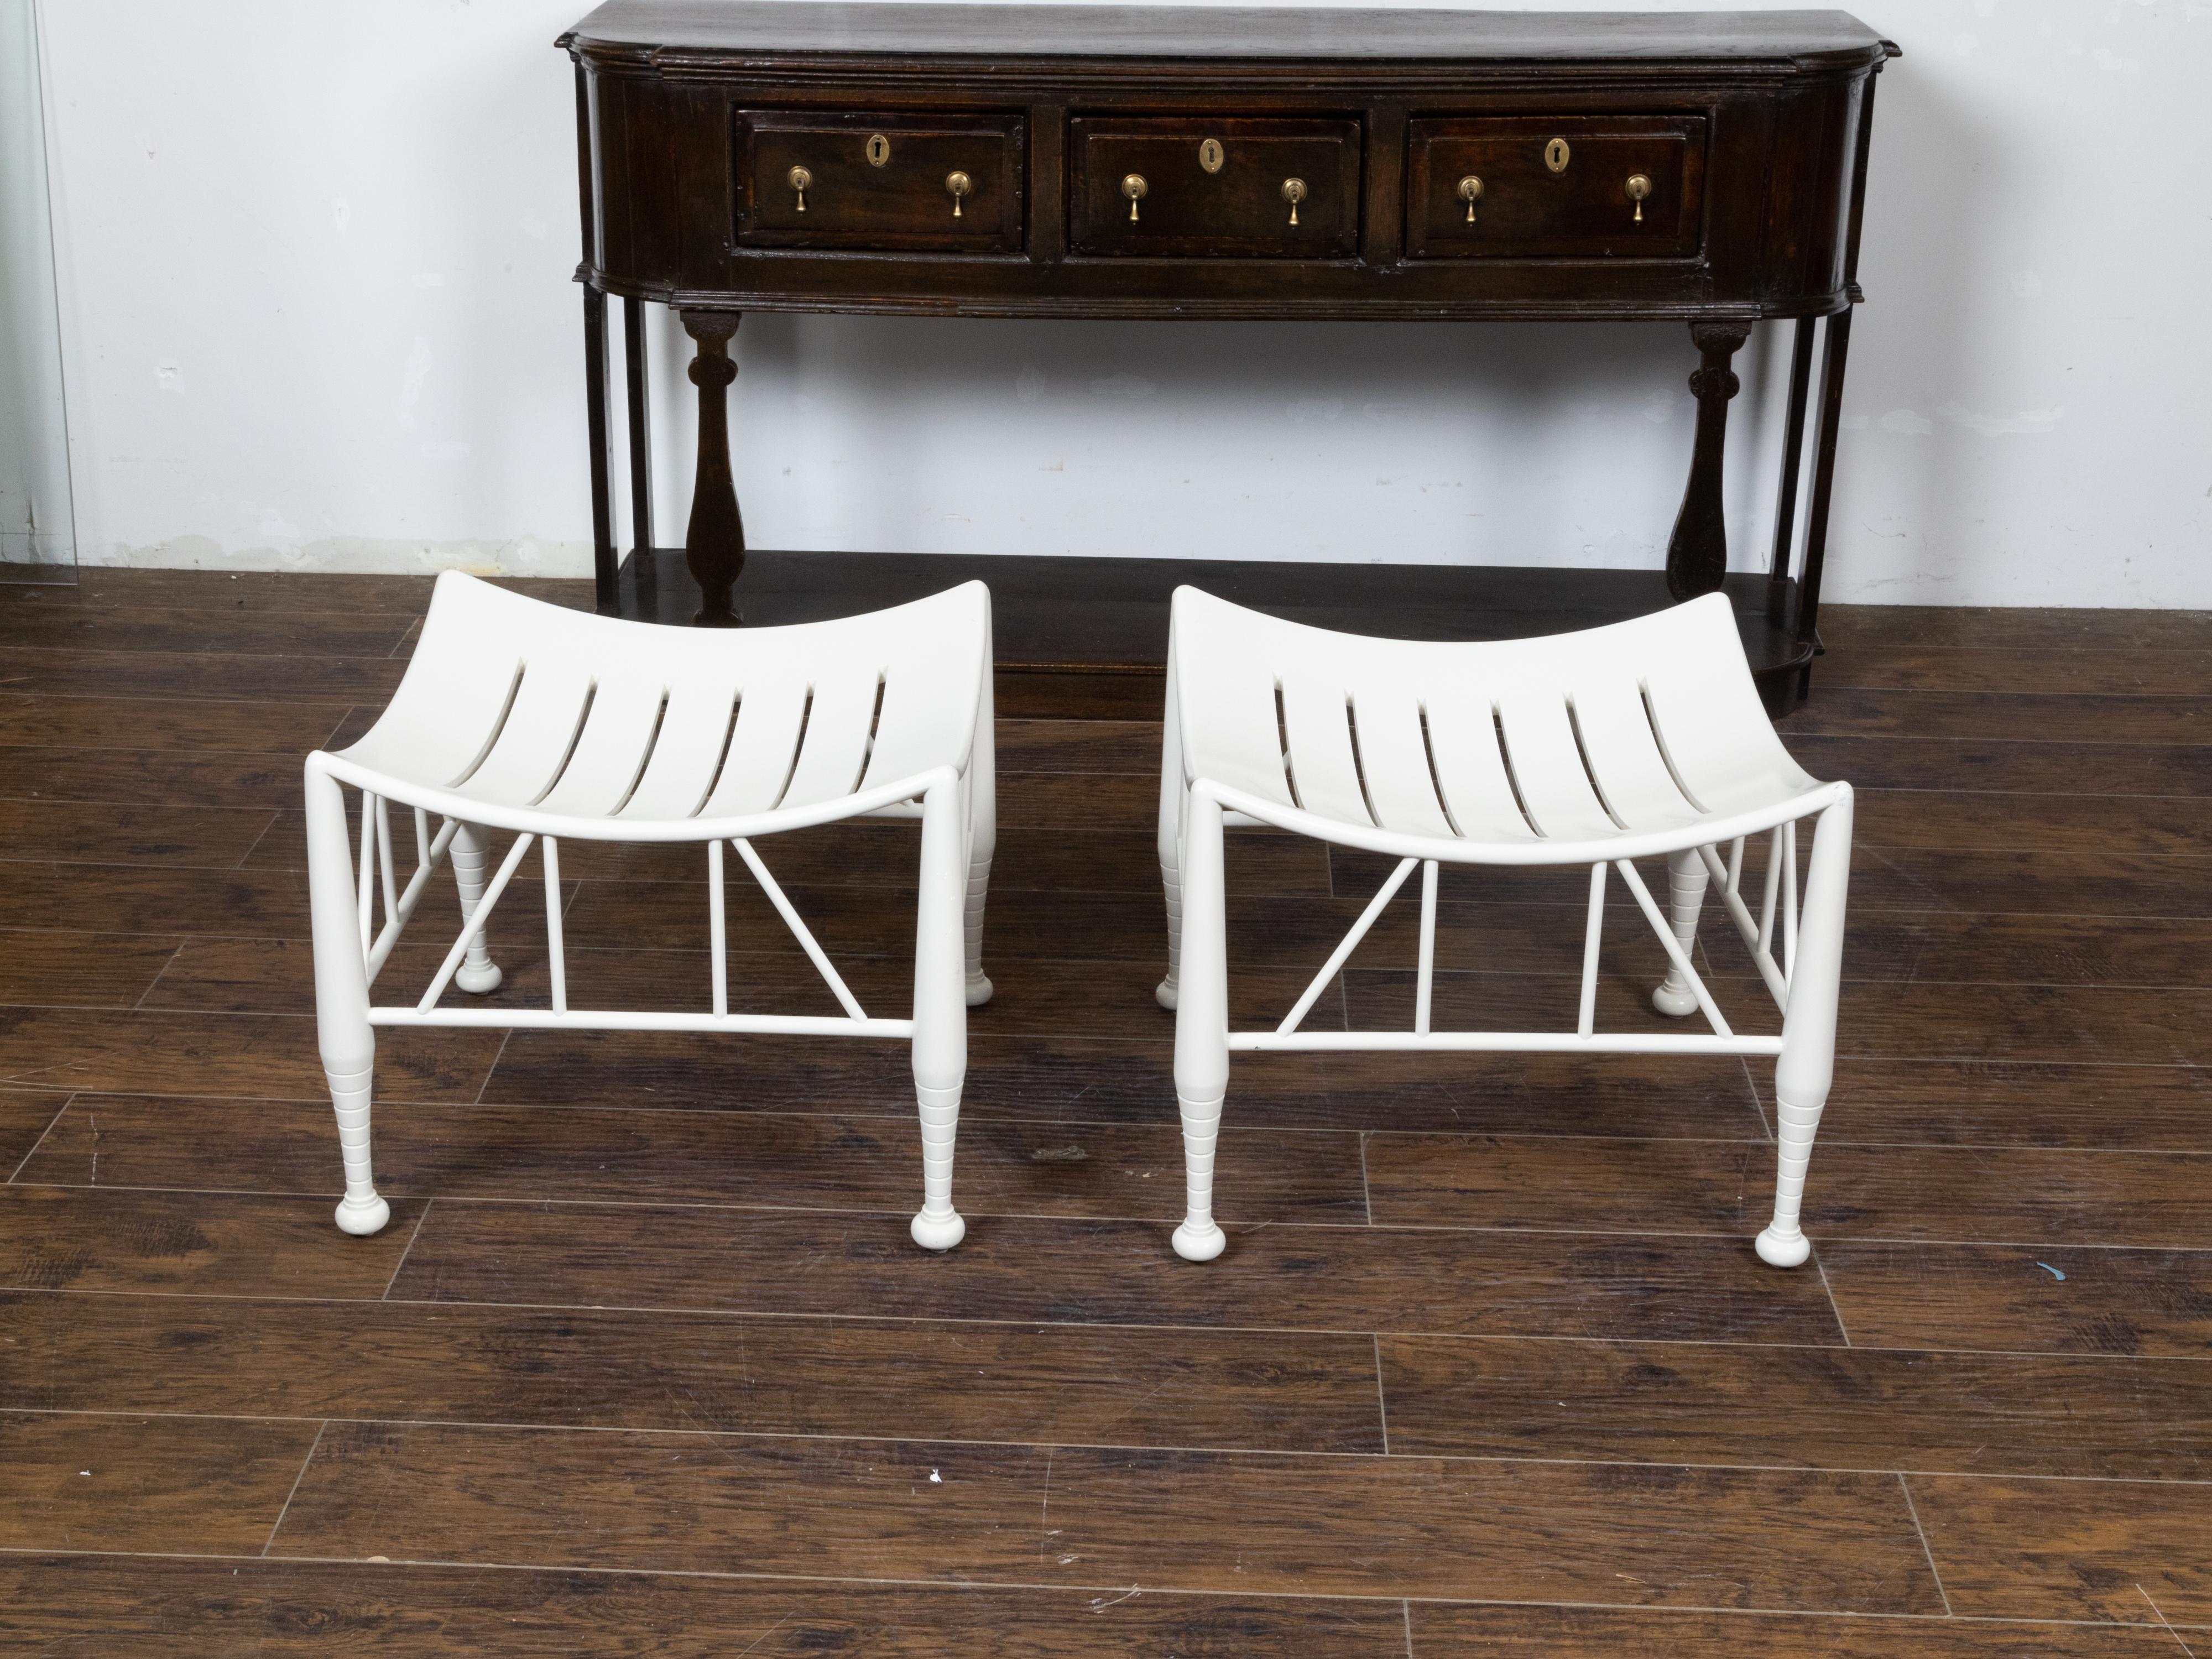 Pair of Vintage English Egyptian Revival White Thebes Stools with Curving Seats In Good Condition For Sale In Atlanta, GA